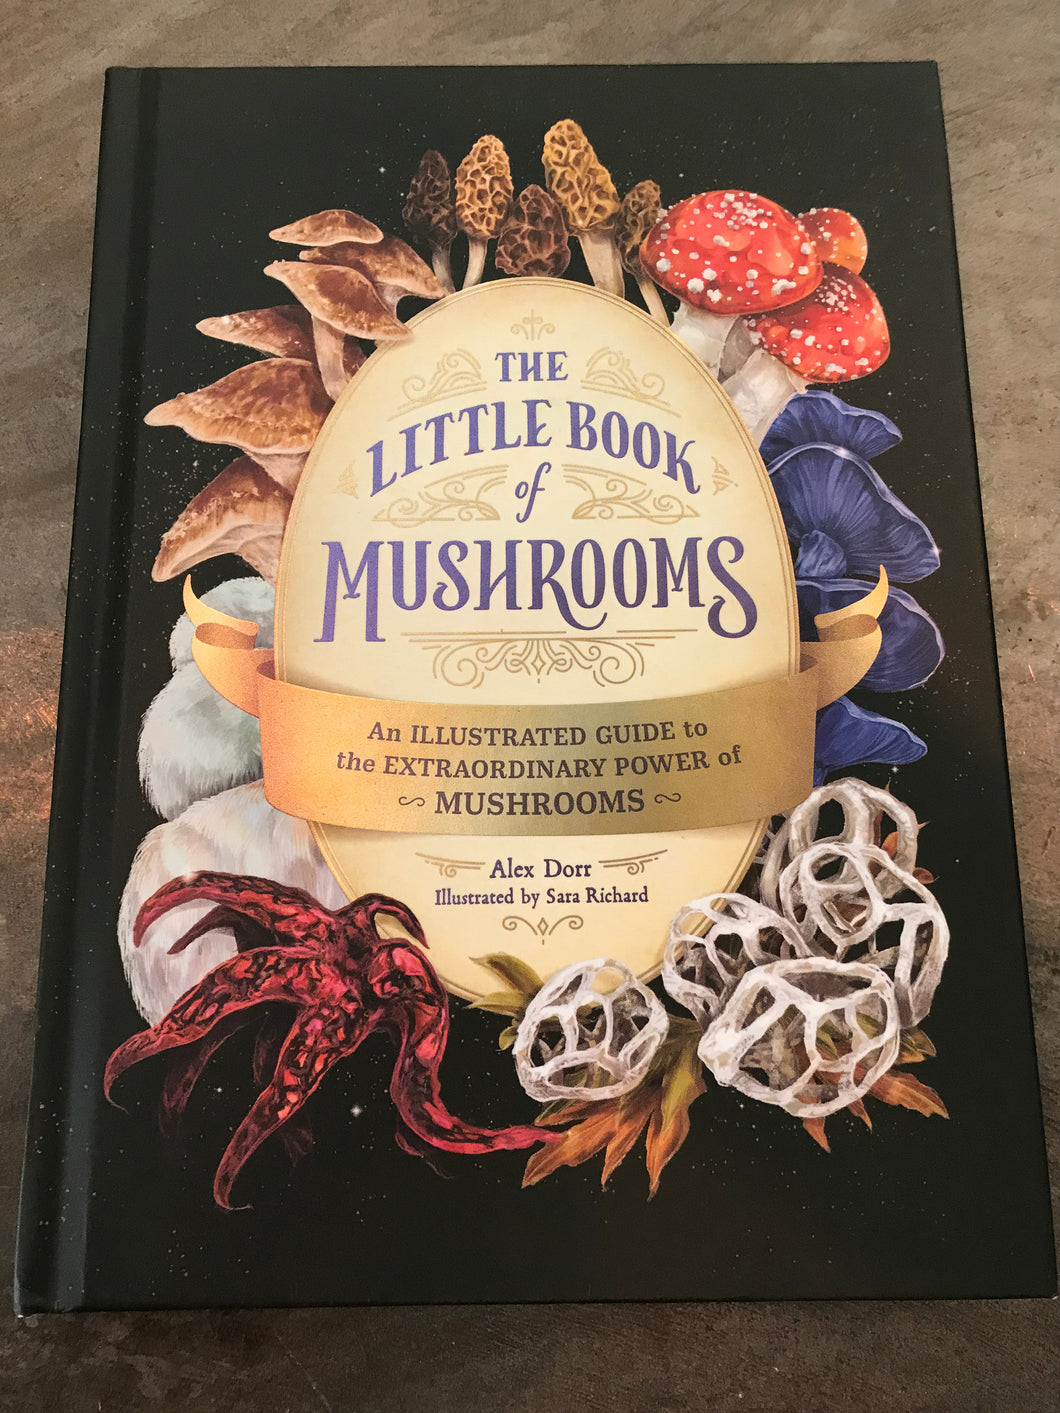 The Little Book of Mushrooms: An Illustrated Guide to the Extraordinary power of Mushrooms